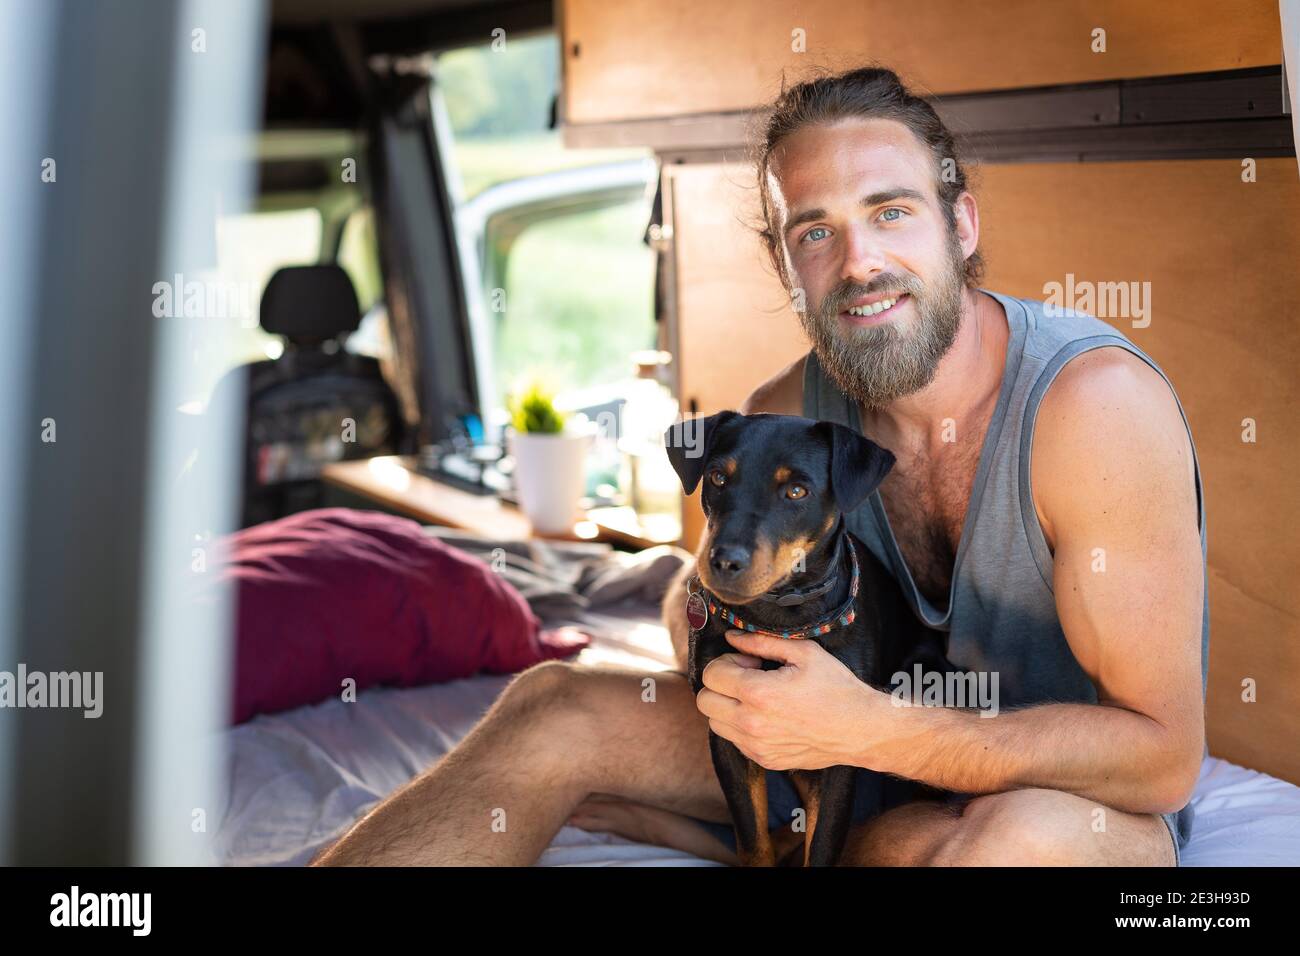 Man with his dog inside a caravan Stock Photo